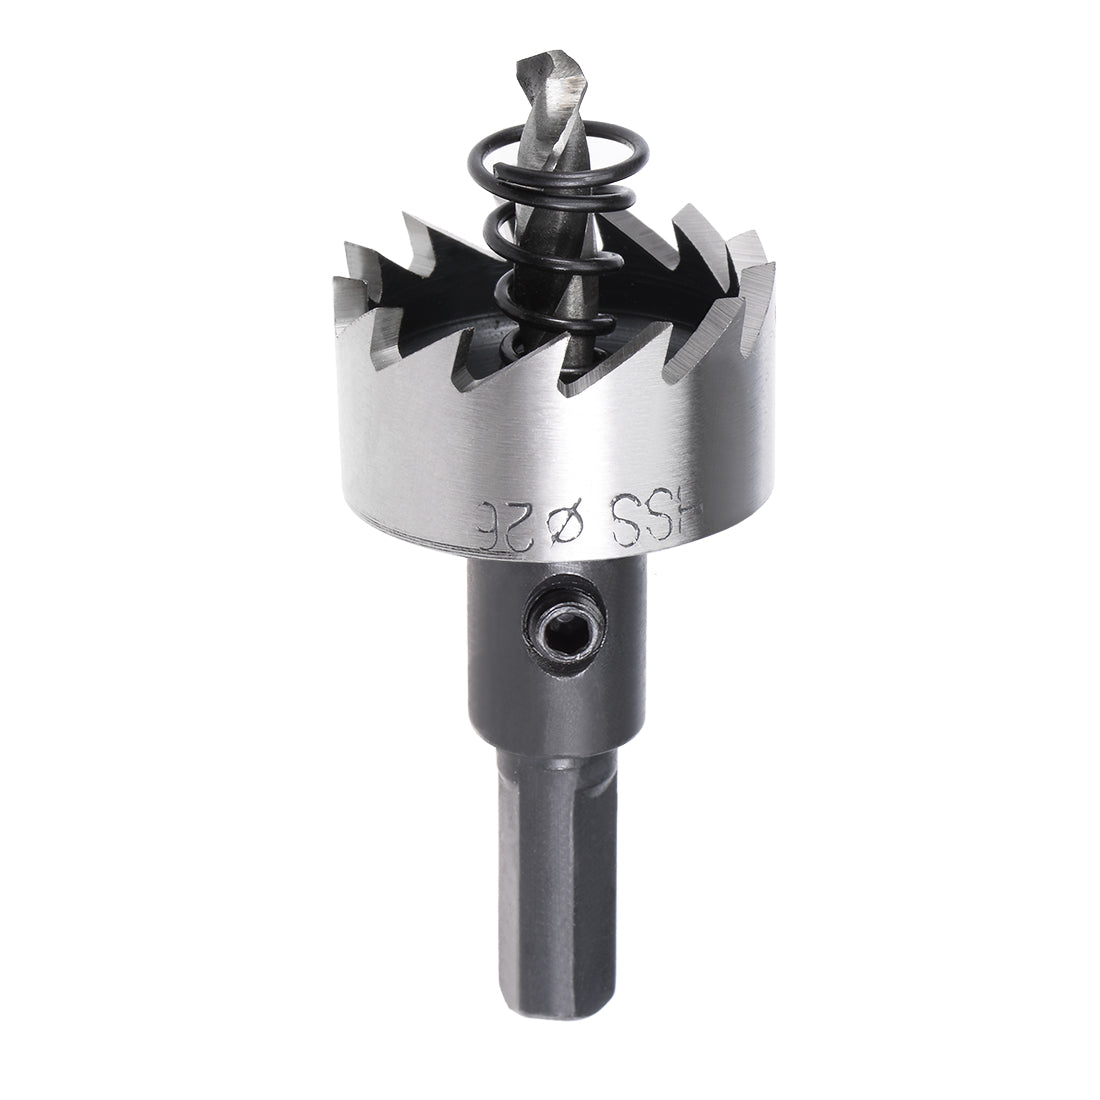 Uxcell Uxcell 28mm HSS Drill Bit Hole Saw for Stainless Steel Metal Alloy Wood